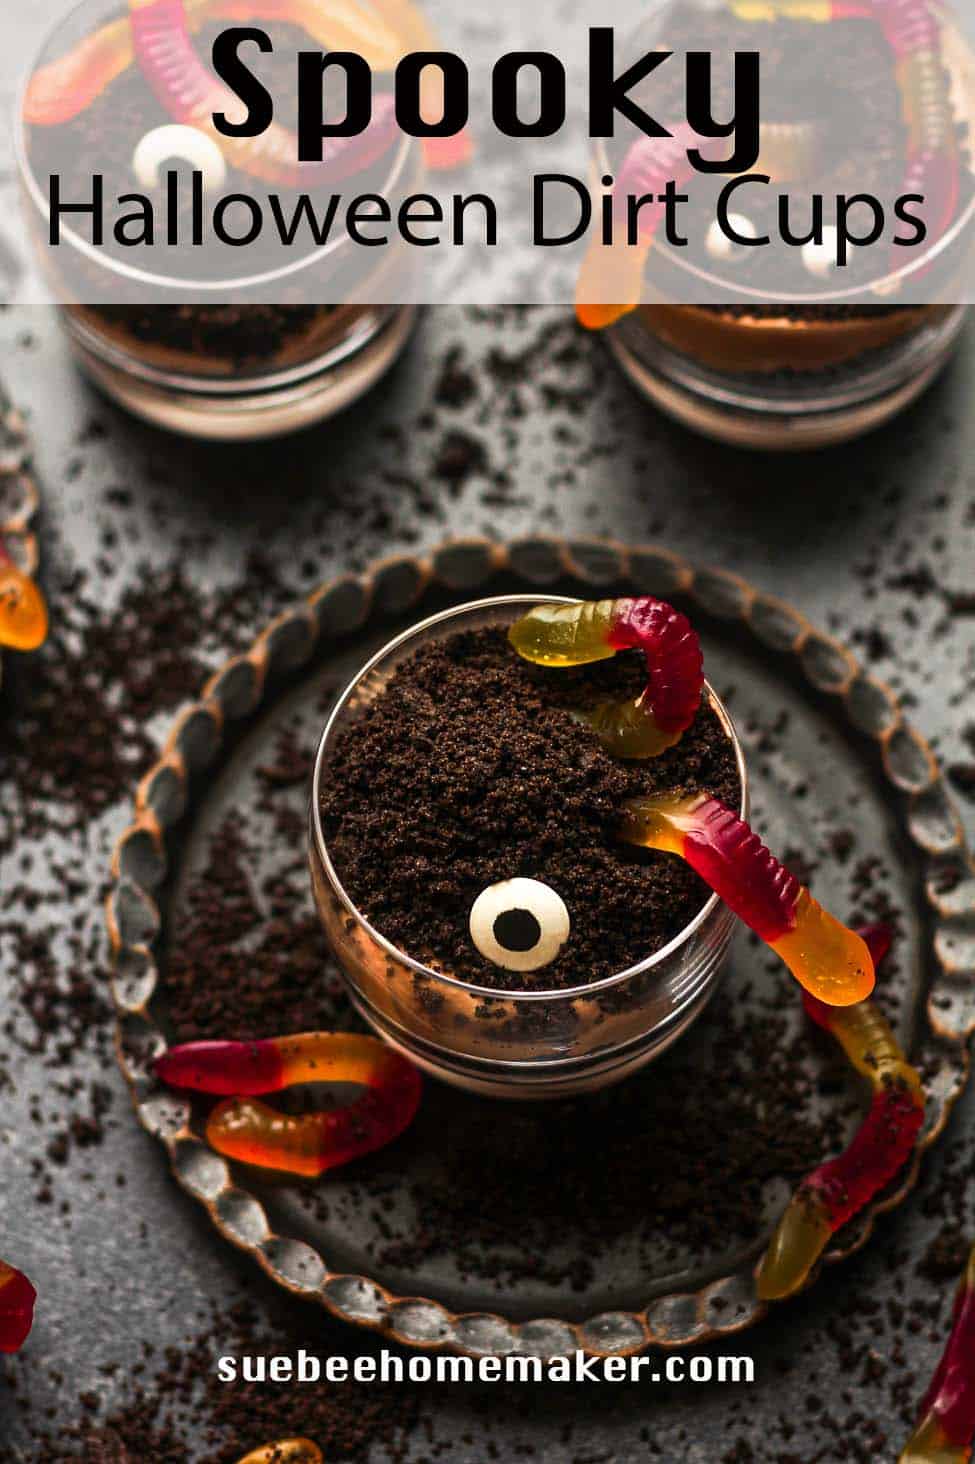 Overhead view of spooky Halloween dirt cups on a dark background.